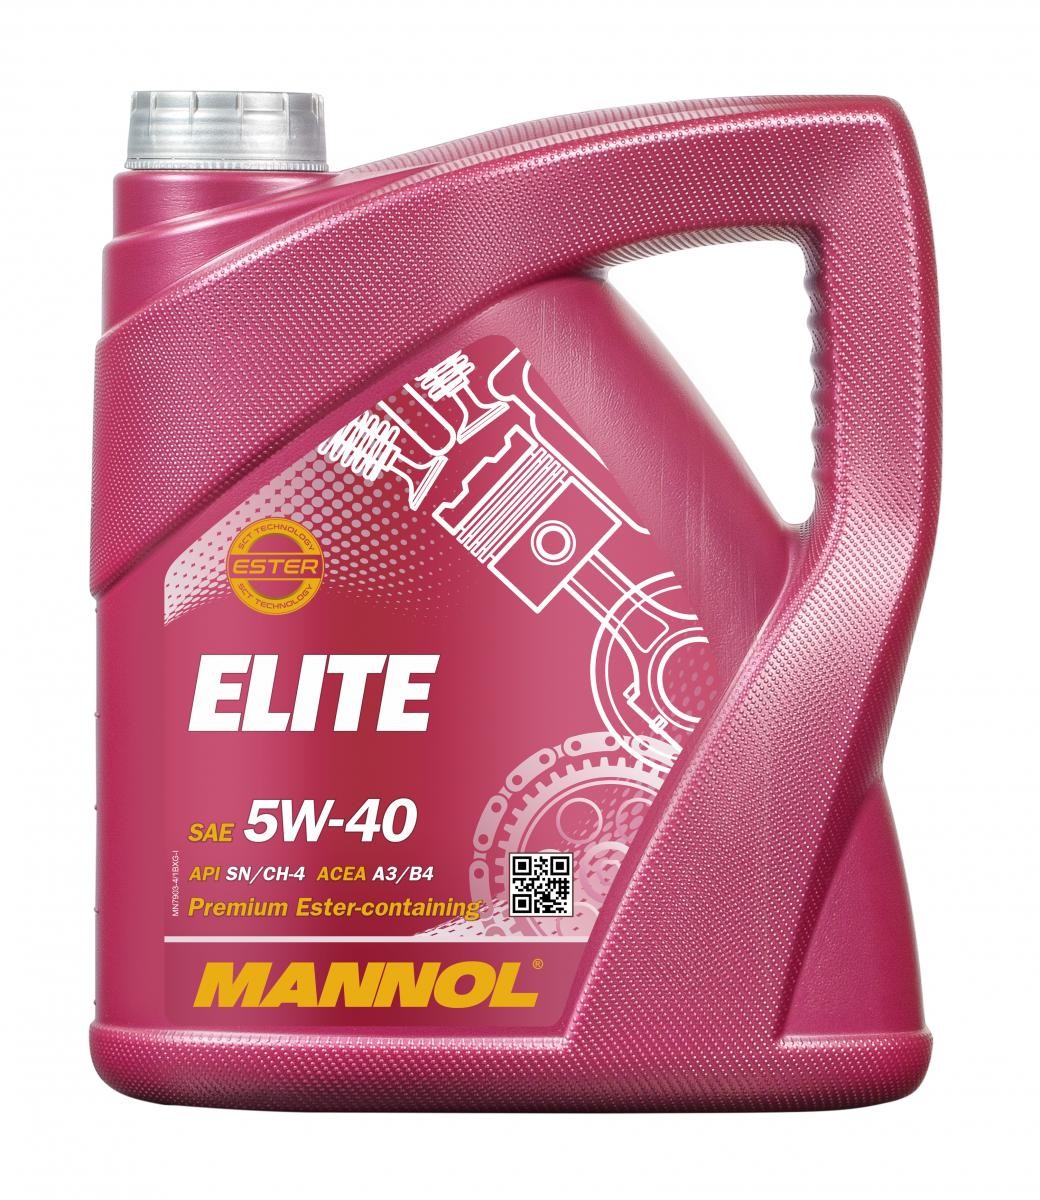 MANNOL ELITE MN7903-4 Engine oil 5W-40, 4l, Synthetic Oil